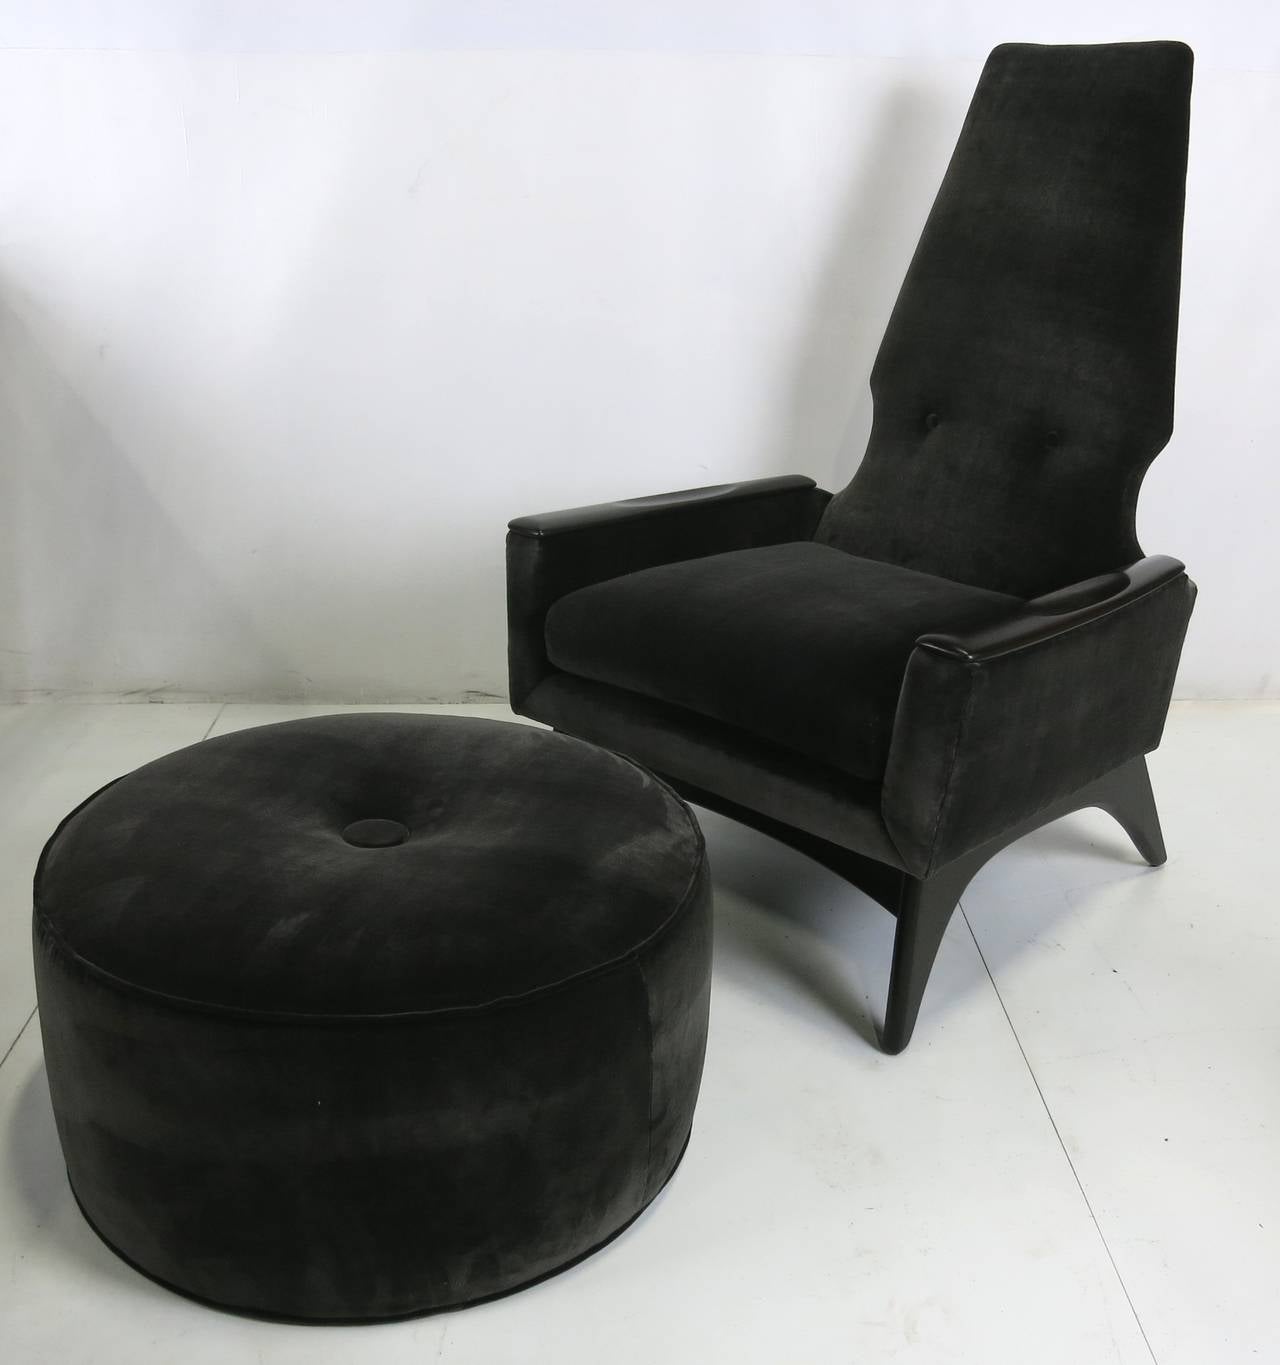 Lounge chair and ottoman by Adrian Pearsall for Craft Associates. The chair and ottoman have been painstakingly restored; refinished, and reupholstered in charcoal grey velvet.